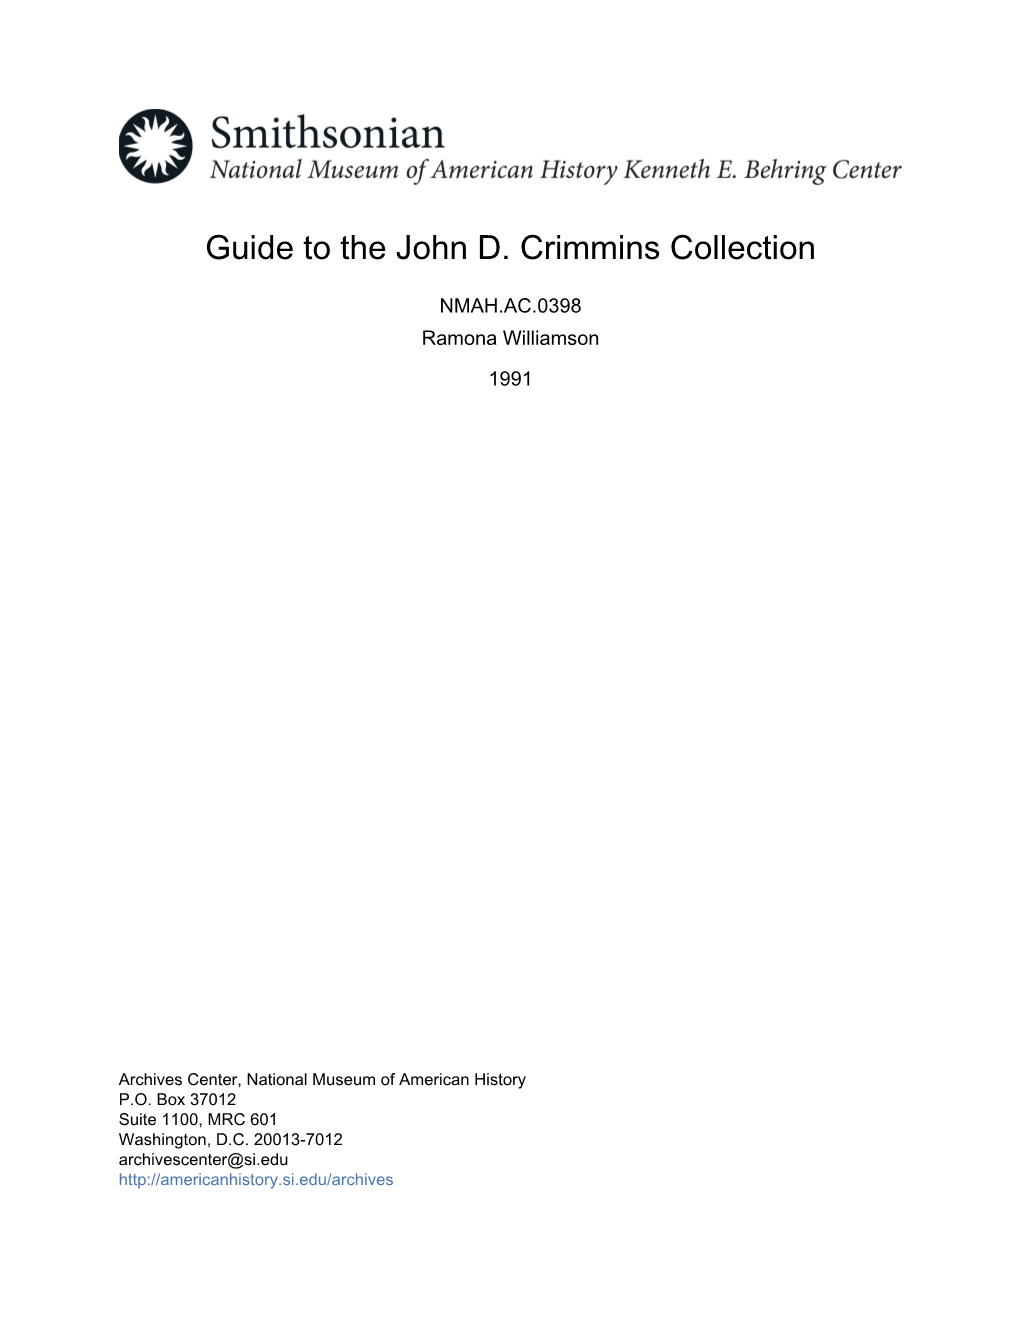 Guide to the John D. Crimmins Collection